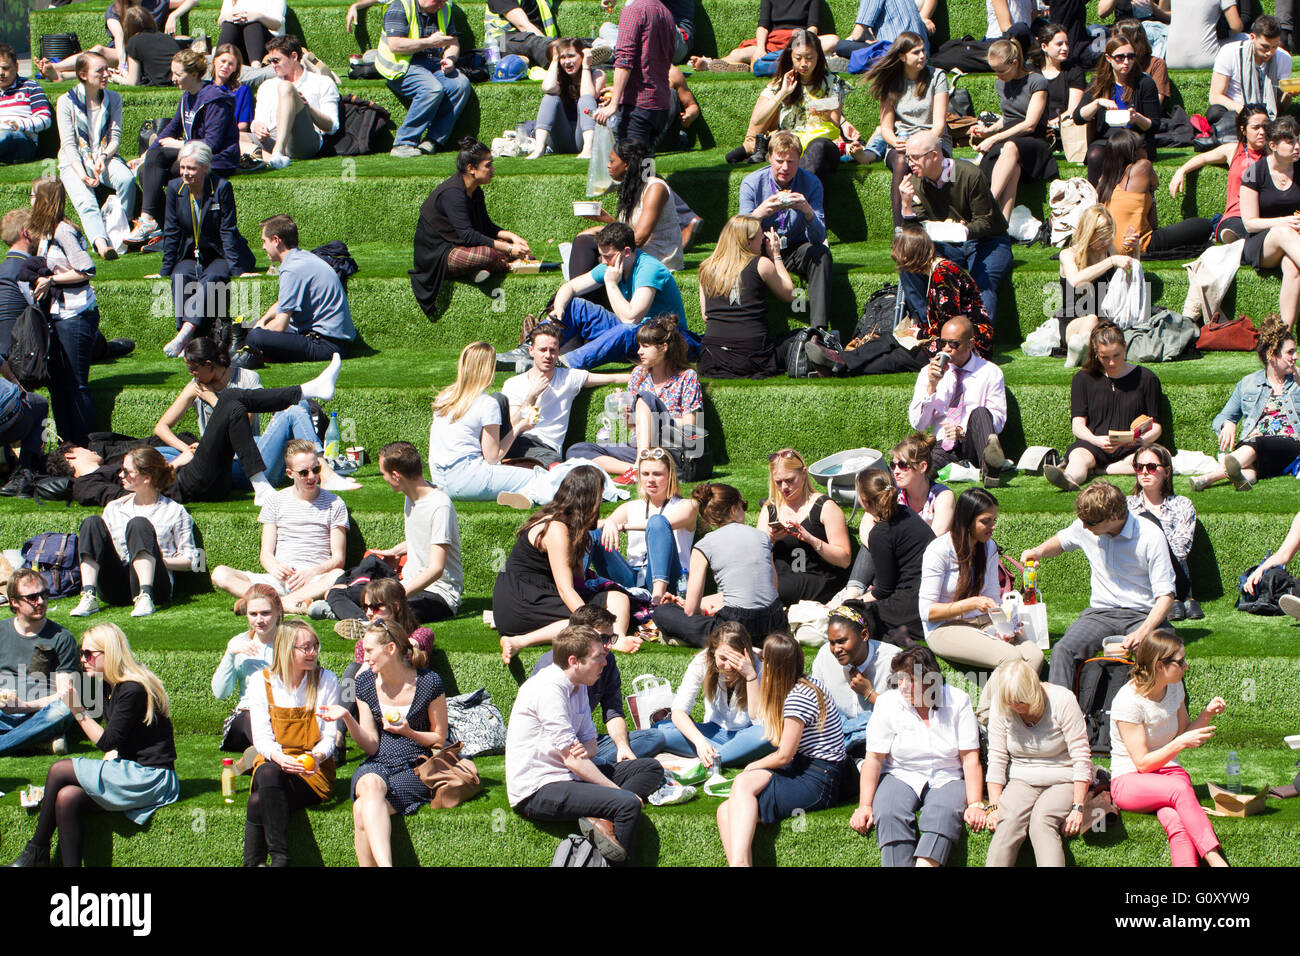 A large group of friends, co-workers and colleagues enjoying their lunch break in the sunshine on a grassy bank in the city. Stock Photo